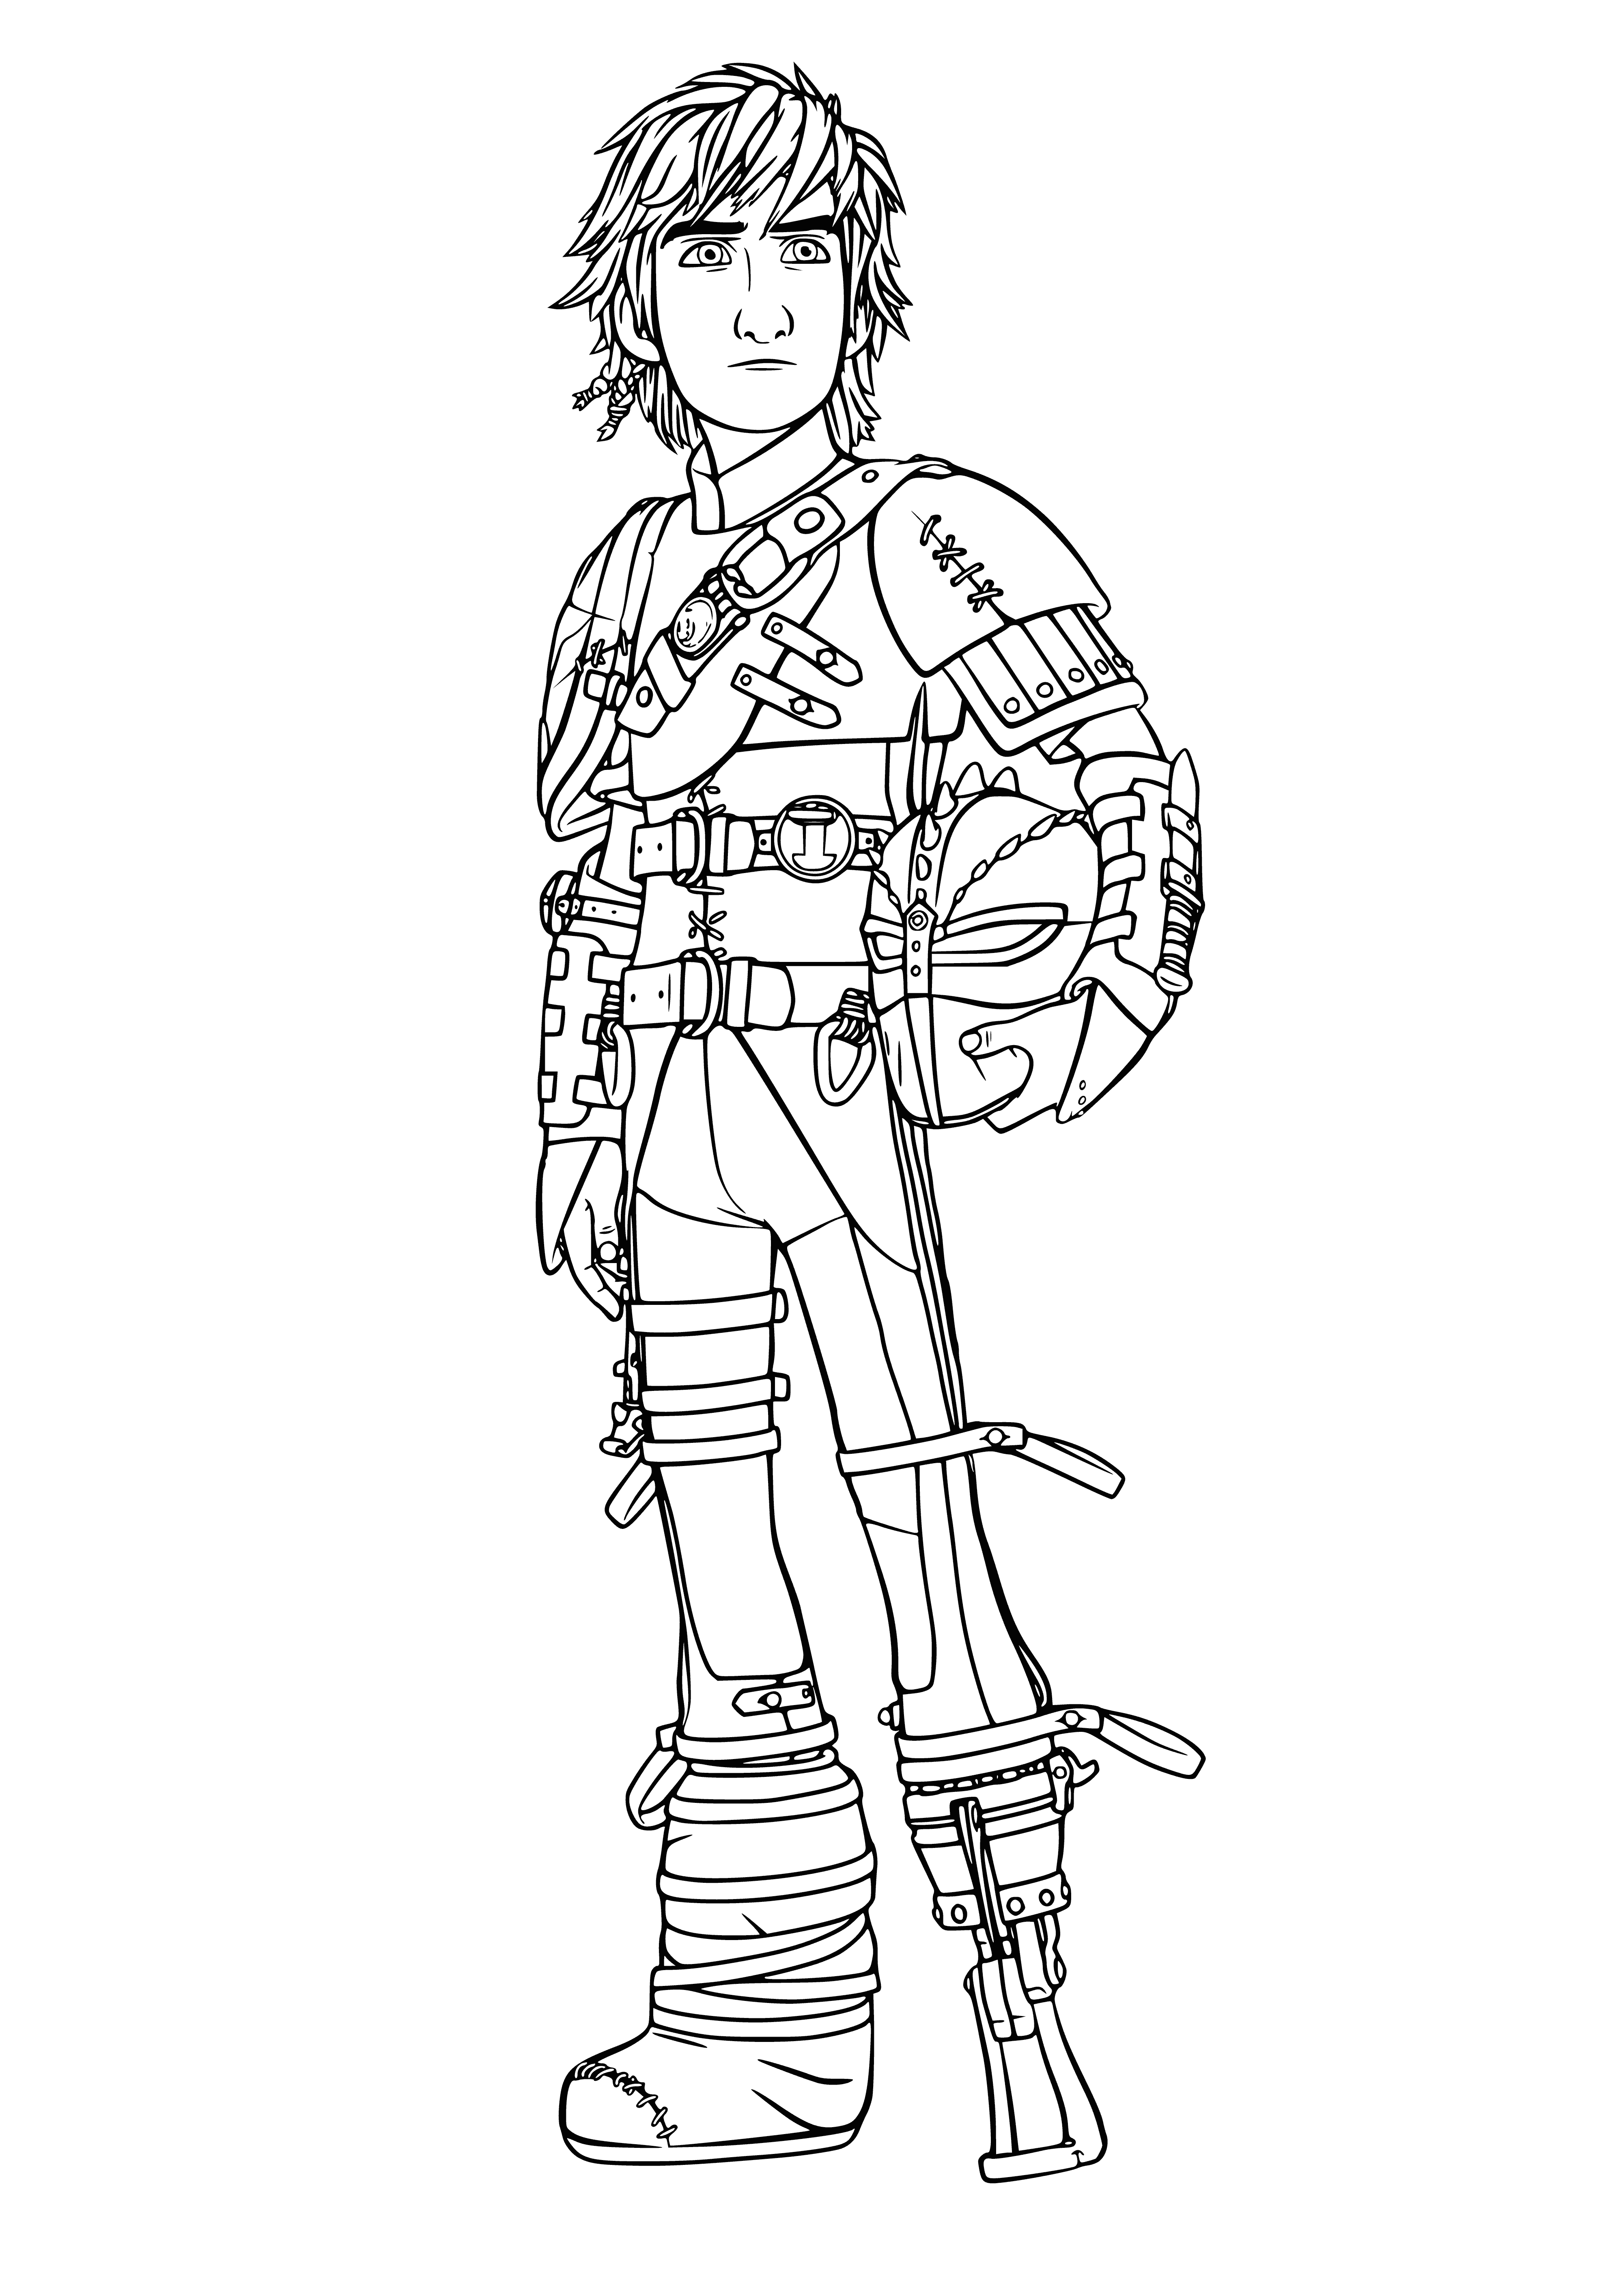 Hiccup coloring page